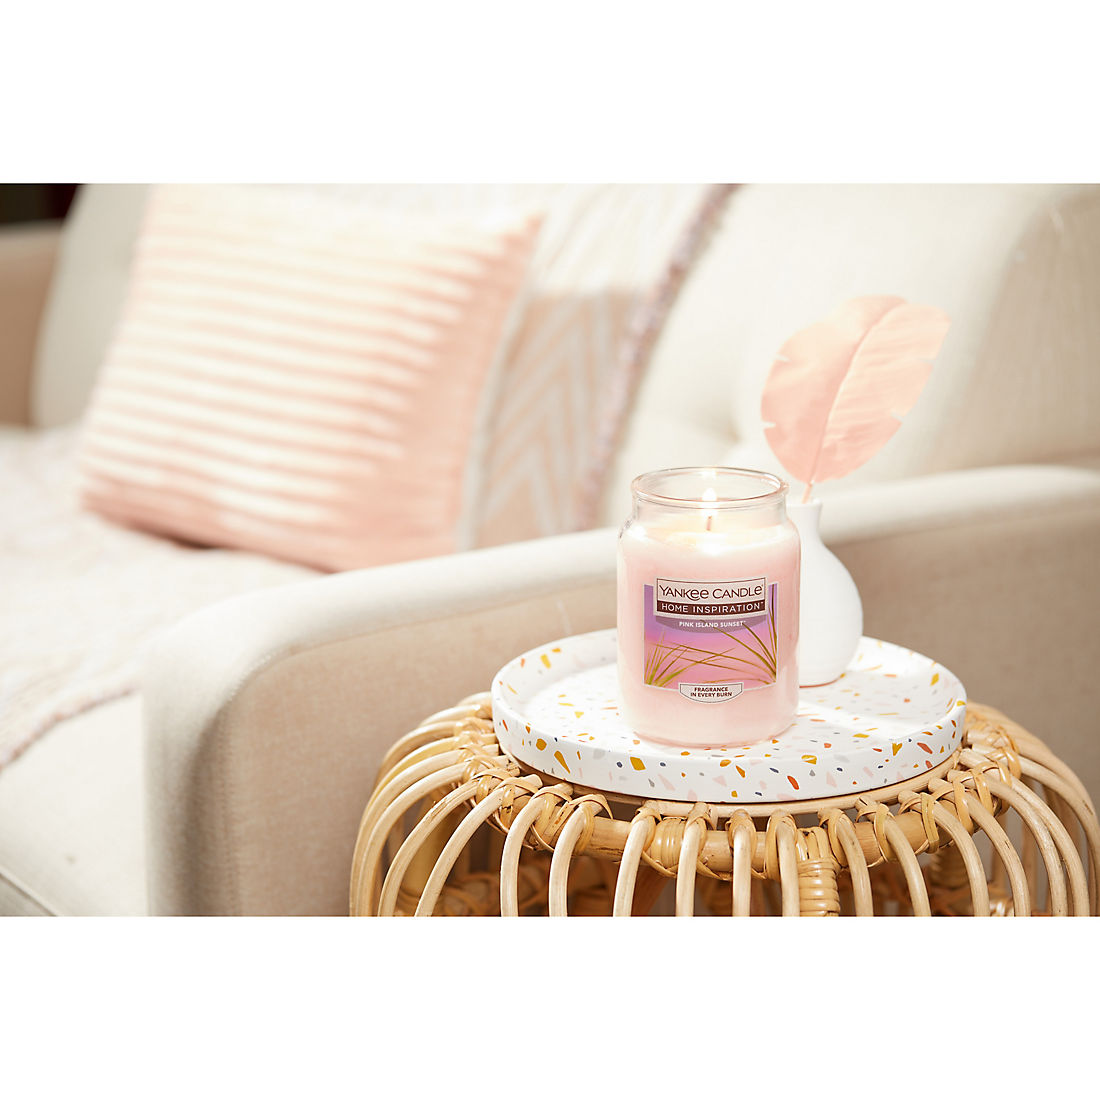  YANKEE CANDLE Yankee Candle Home Inspiration